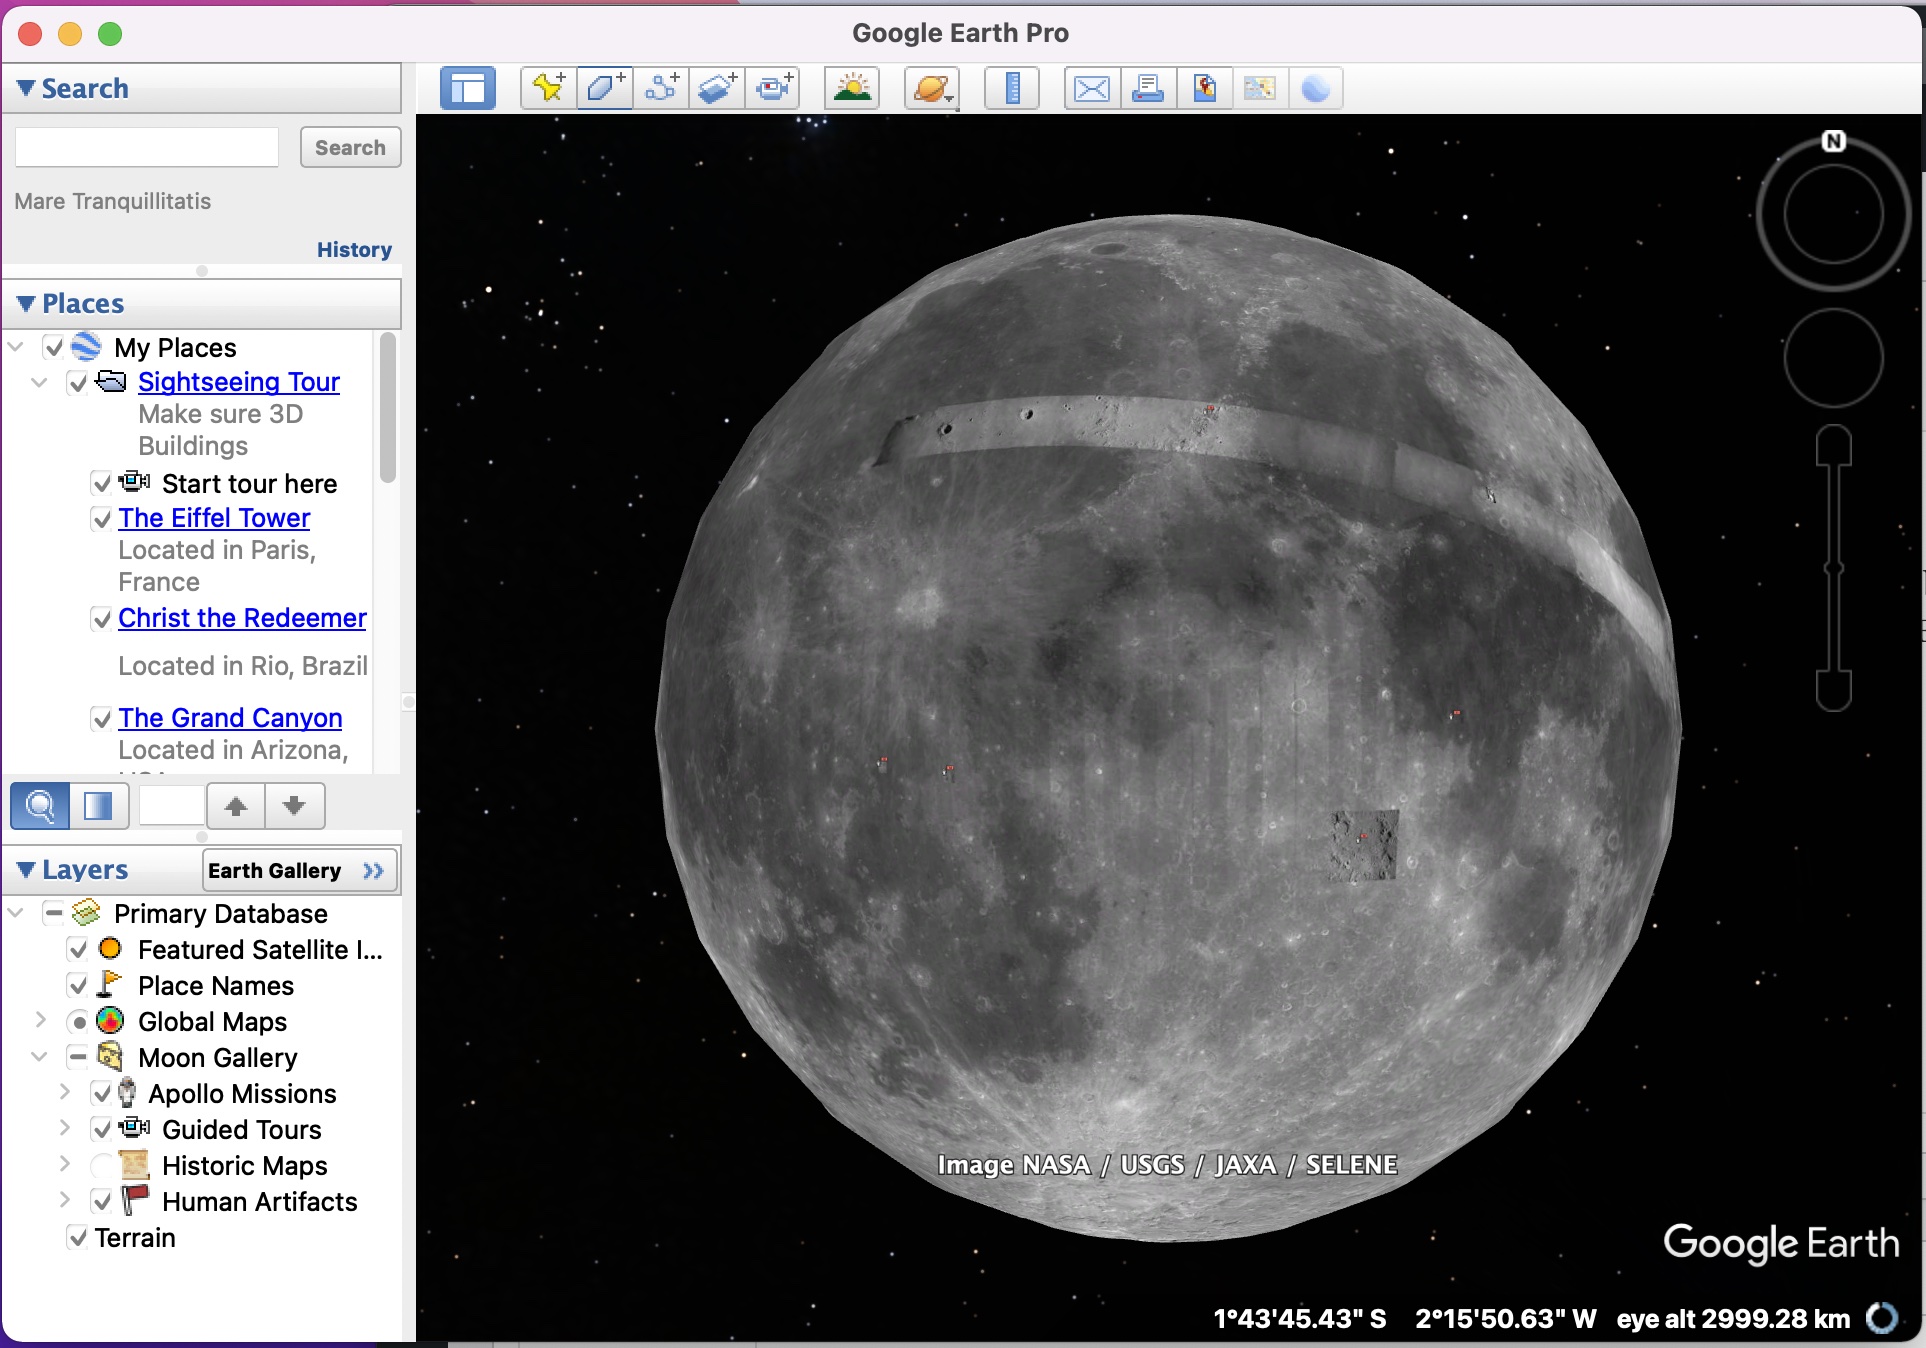 How to take a virtual tour of the Moon using Google Earth